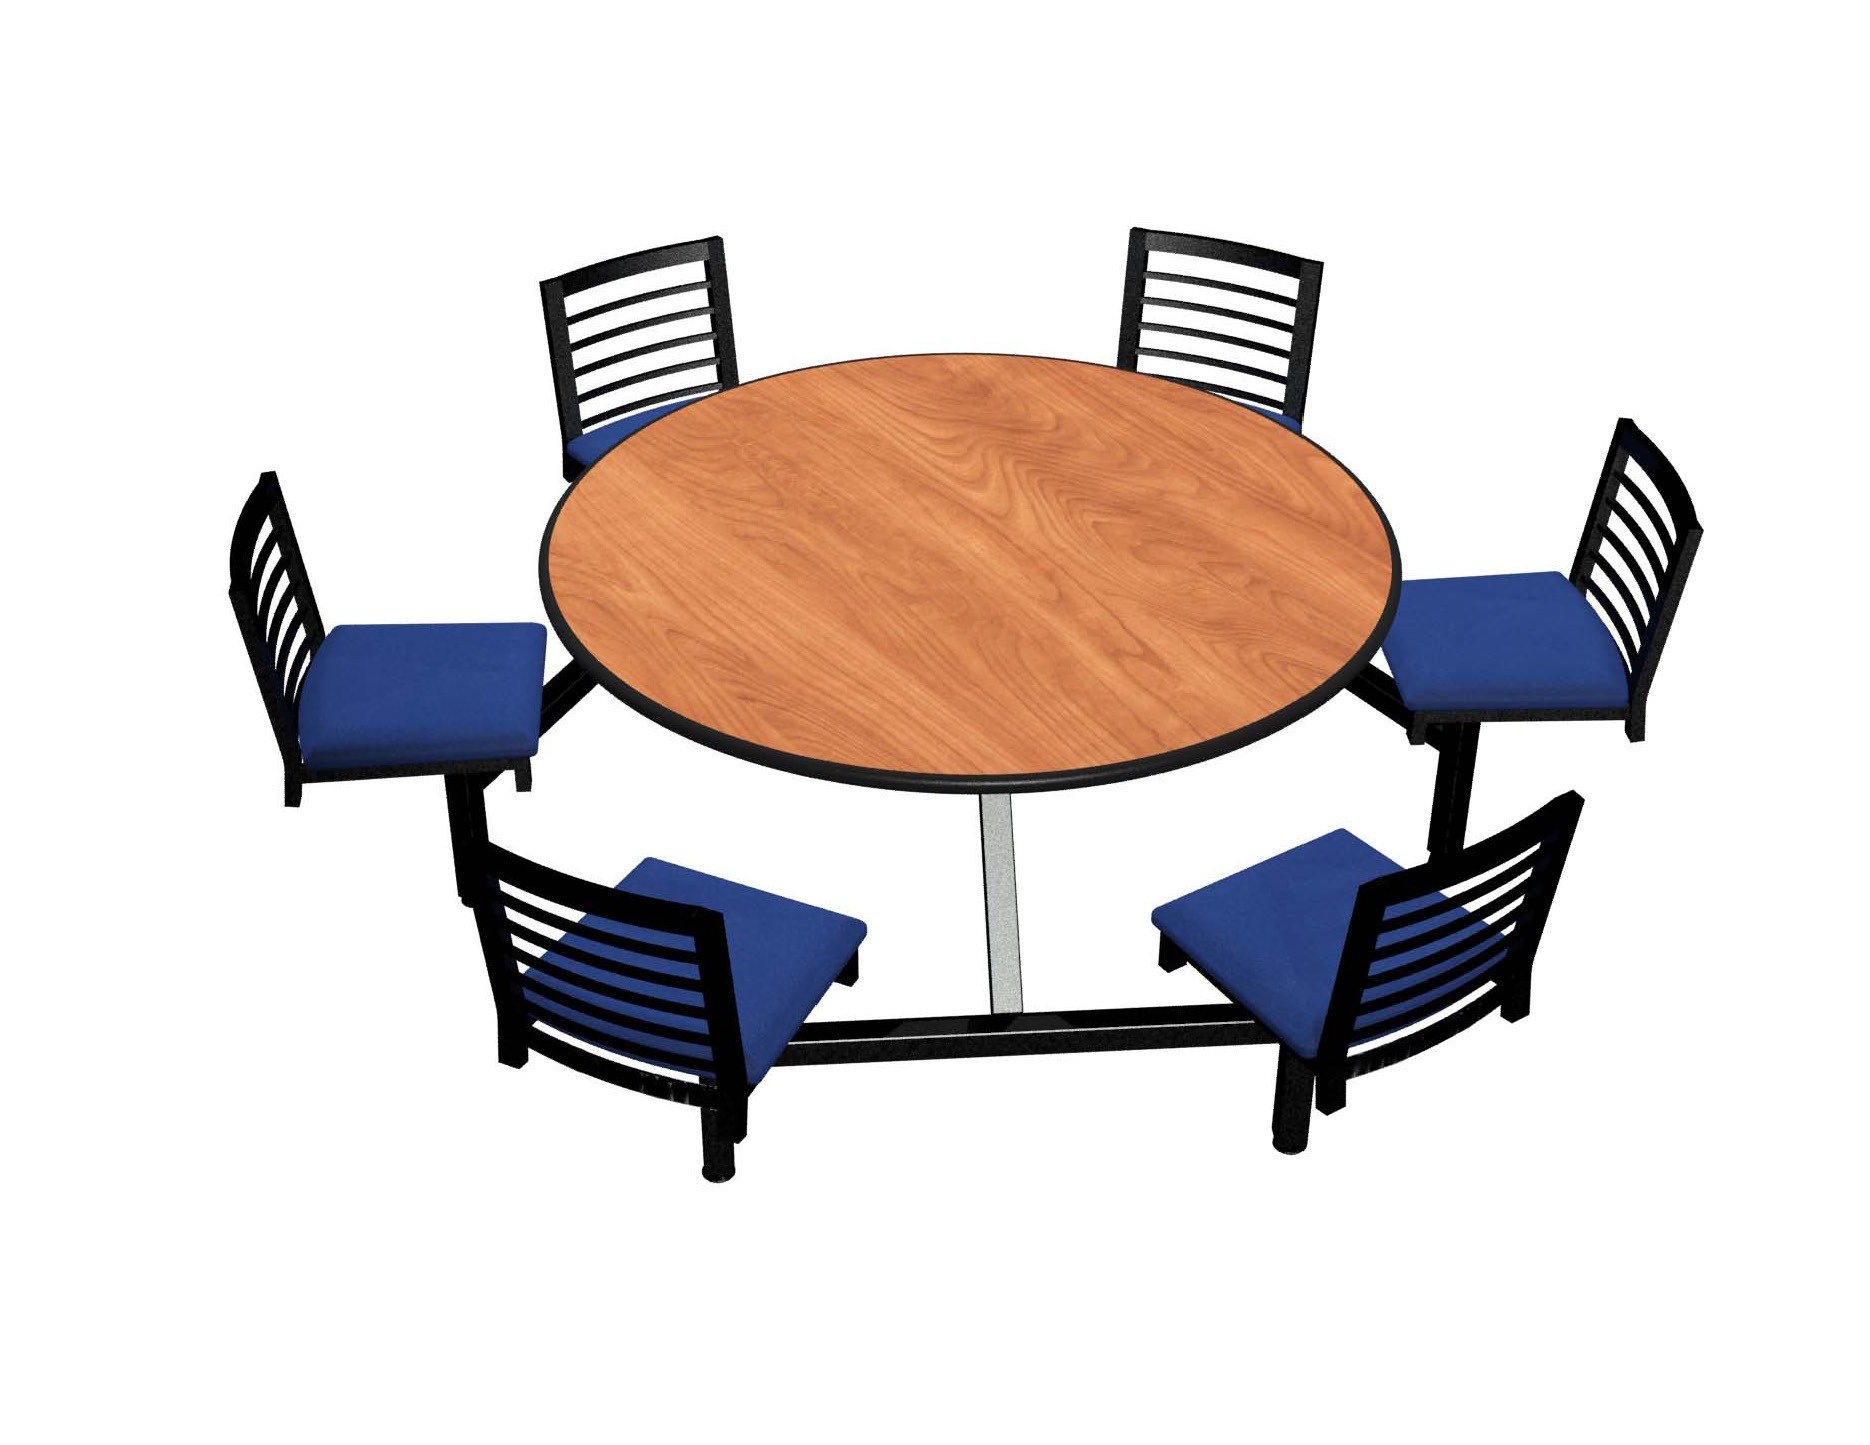 Wild Cherry laminate table top, Black Dur-A-Edge®, Latitude chairhead with Bluejay seat